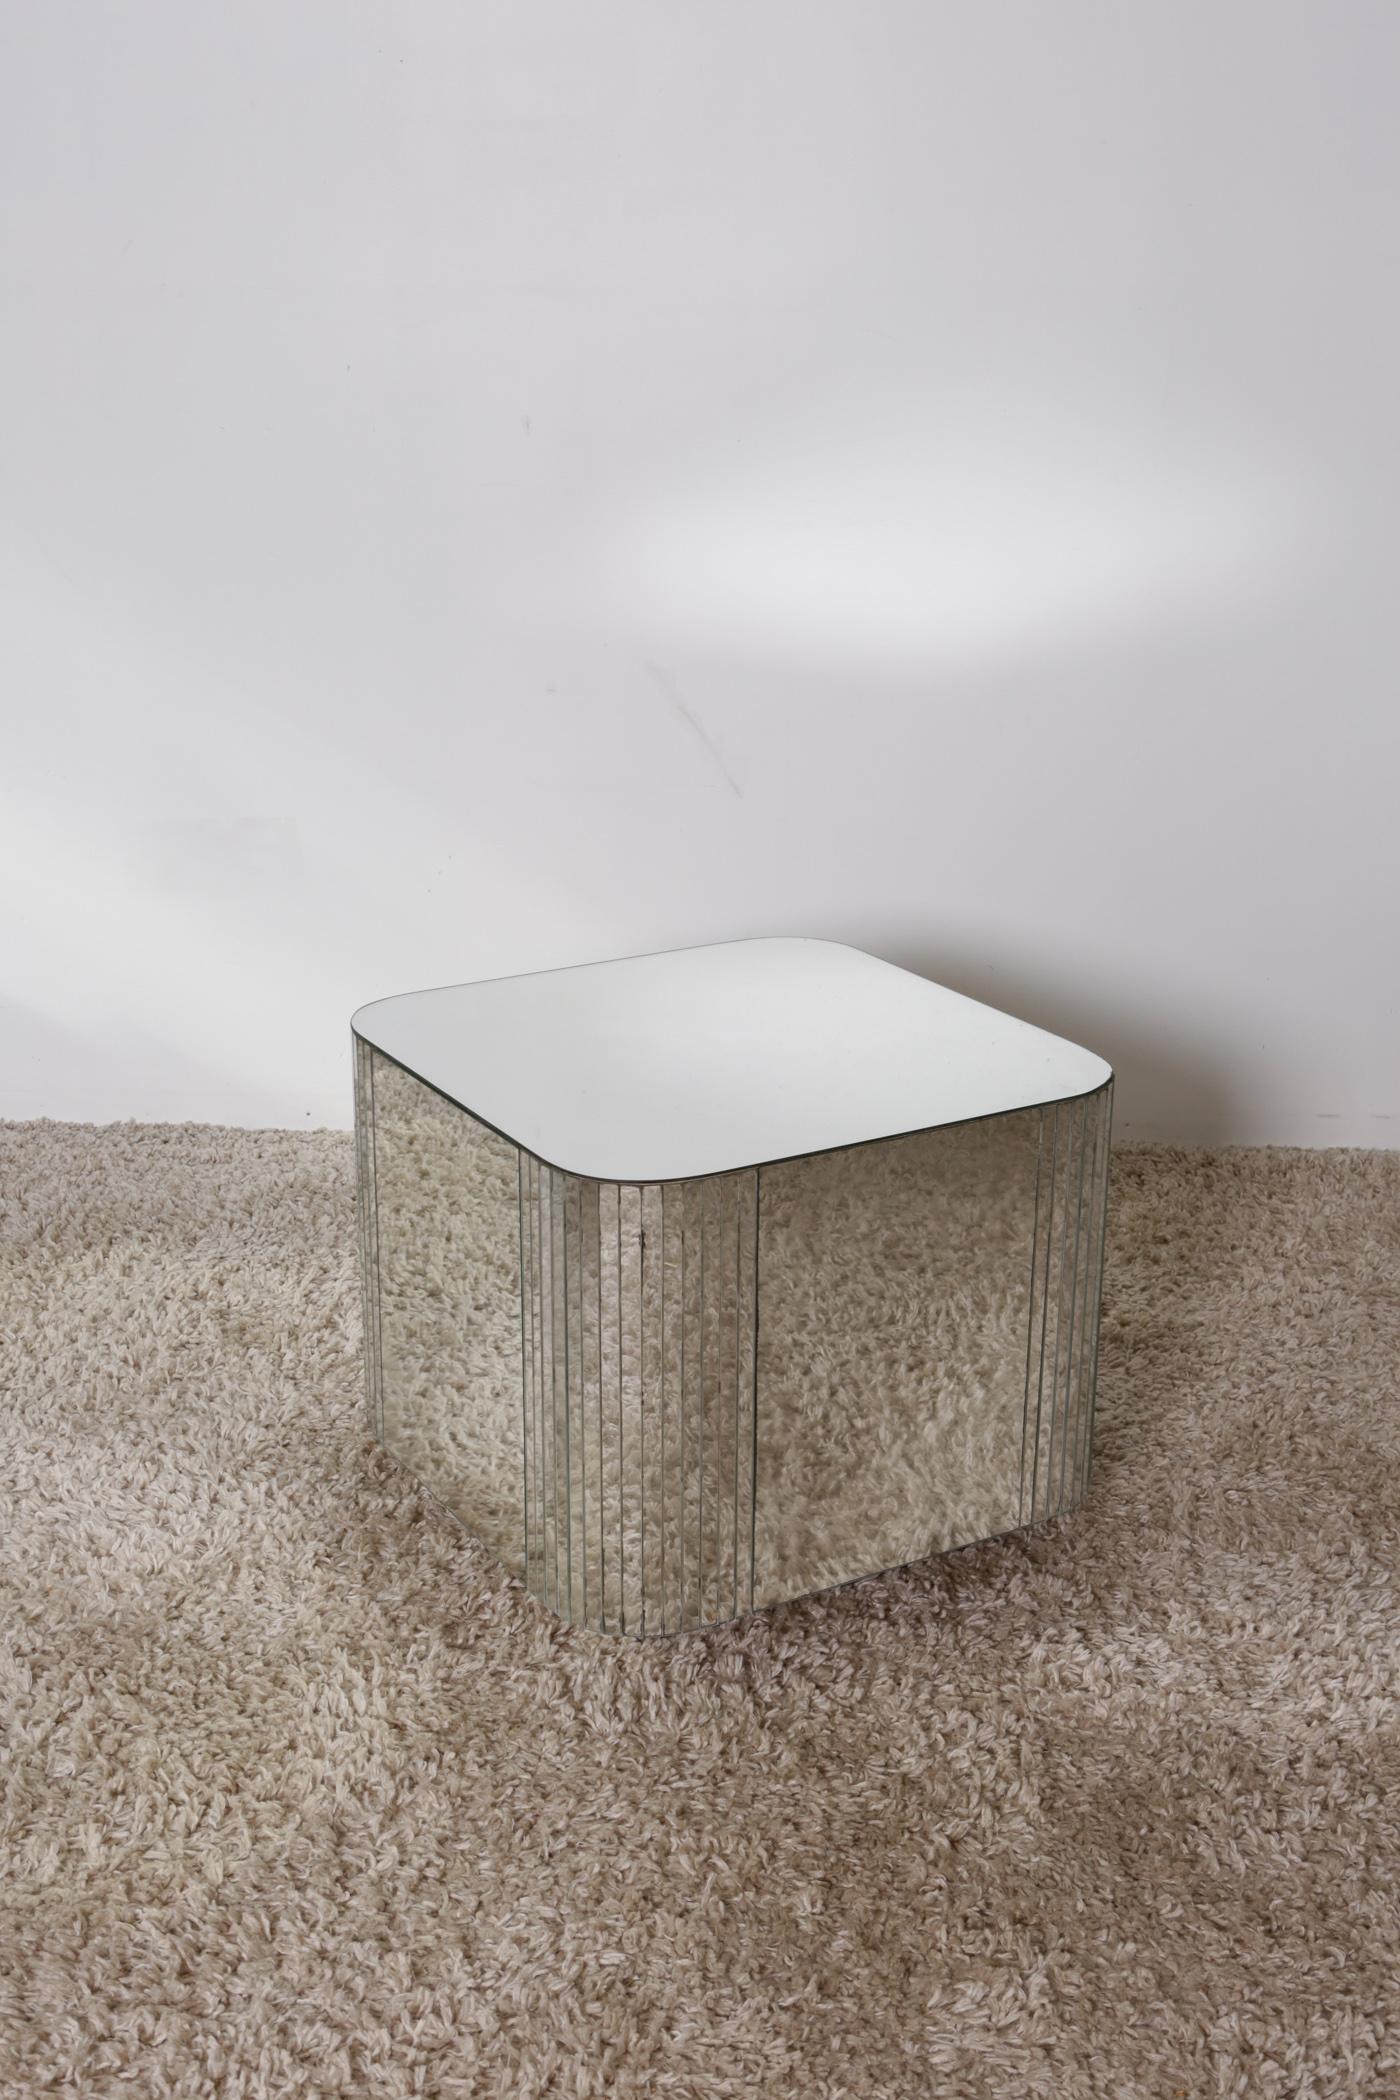 Mid-Century Modern mirror coffee/side table. A versatile, fun mirror cube table that can be used for either a side or coffee table. With the beautiful Mid-Century Modern mirror detail, this table compliments any interior. A minor chip in the bottom